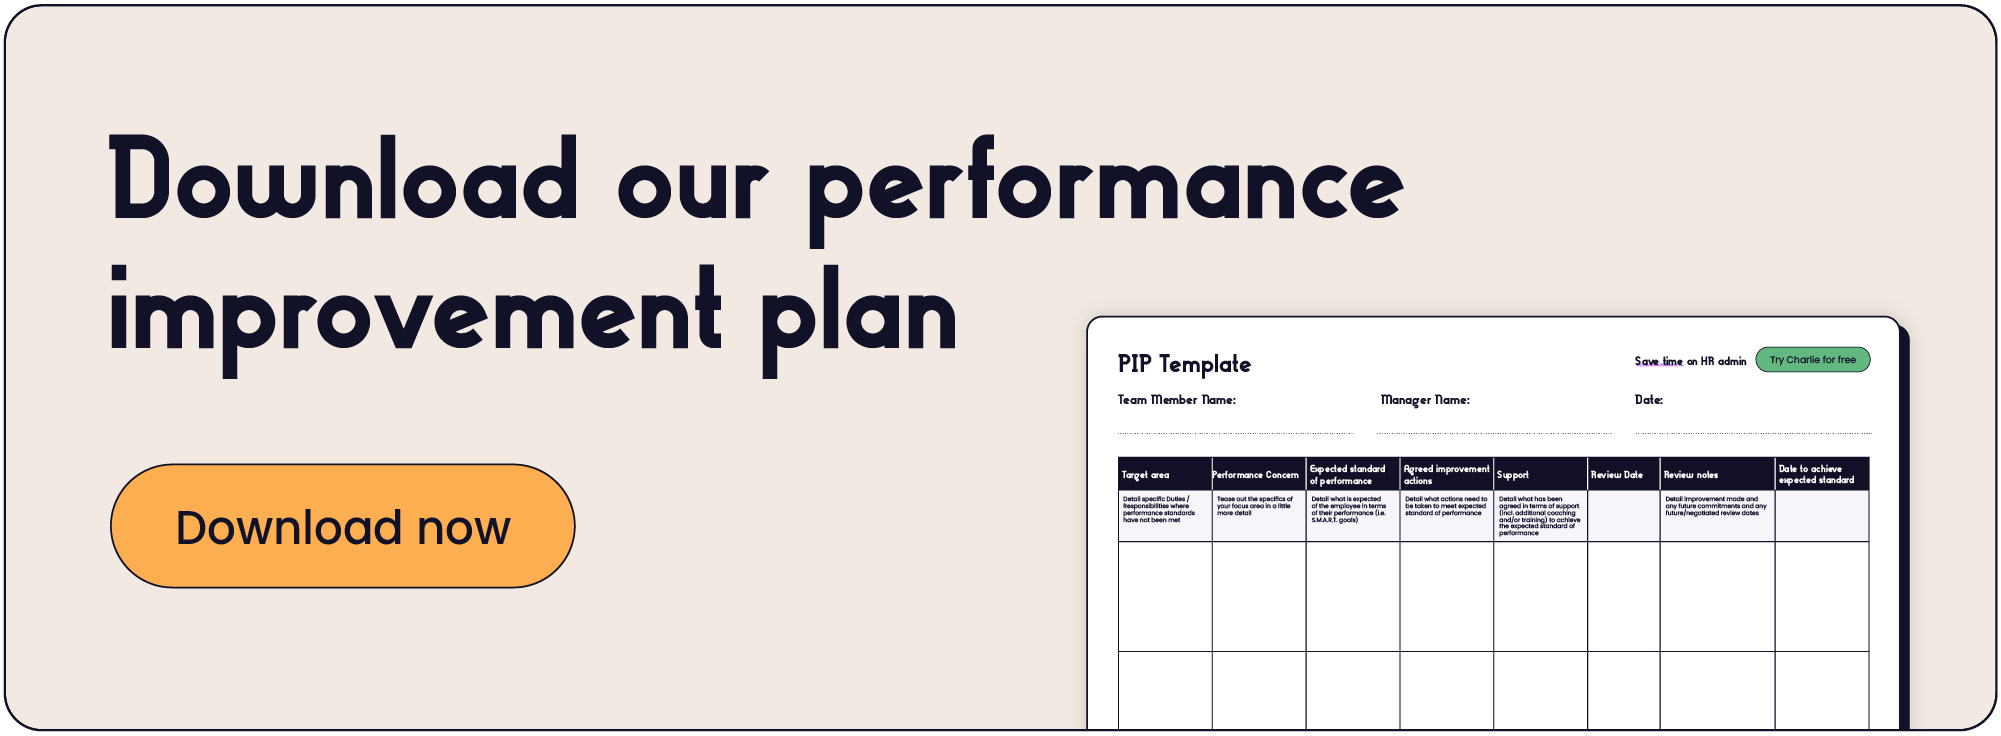 Click here to download our performance improvement plan template